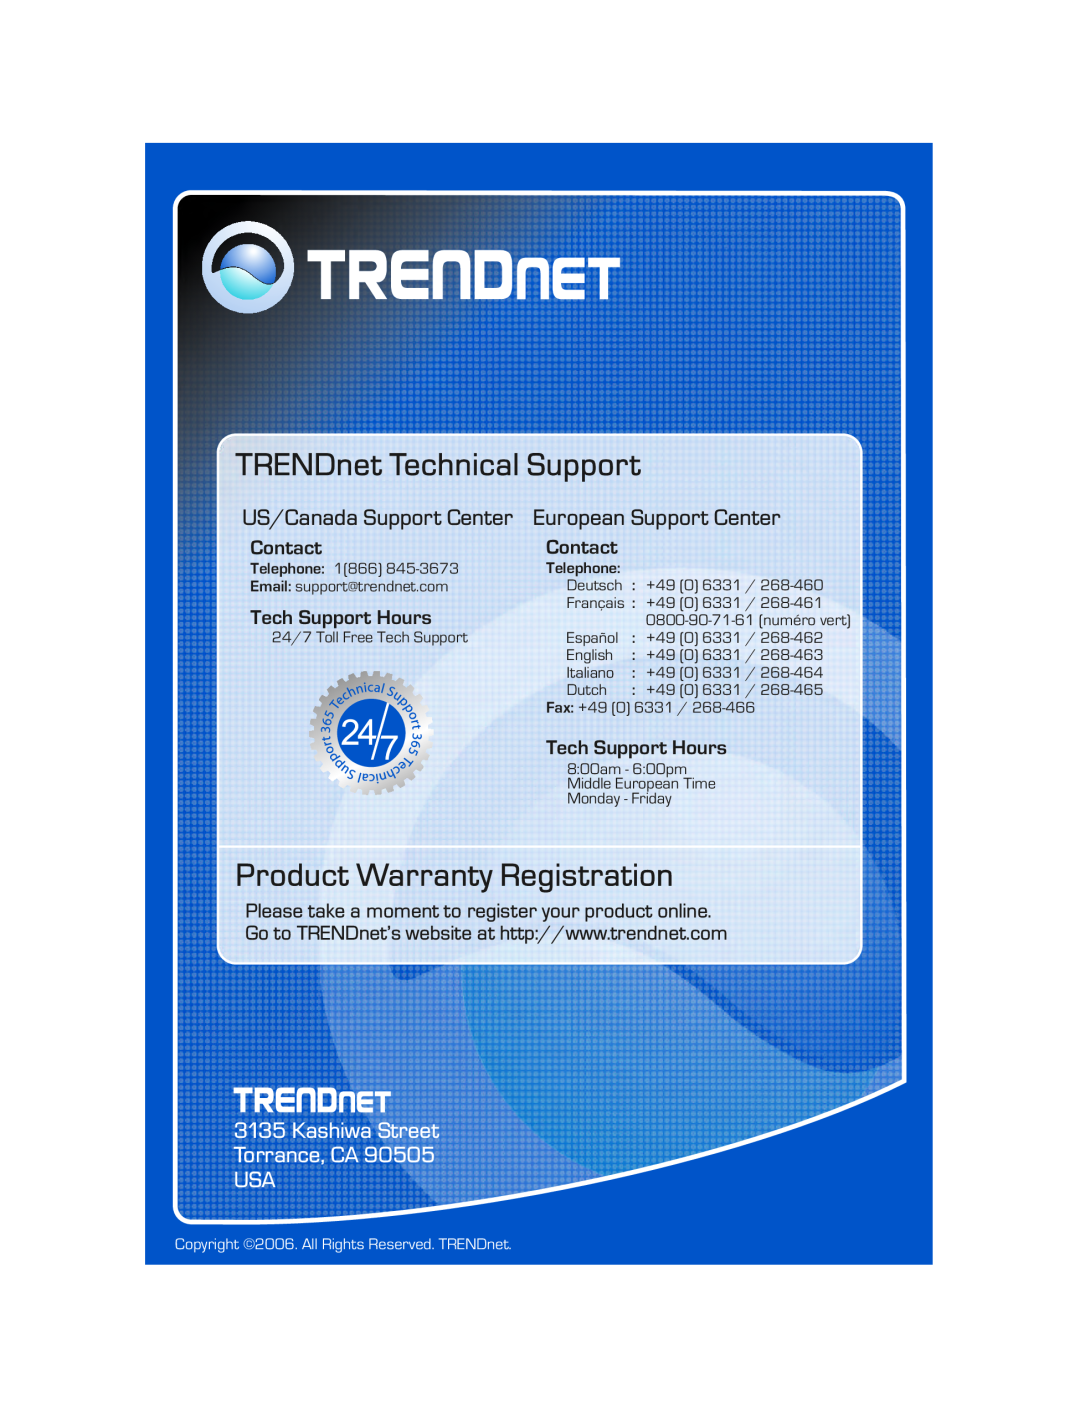 TRENDnet TPE-224WS TRENDnet Technical Support, Product Warranty Registration, Kashiwa Street Torrance, CA USA, Contact 